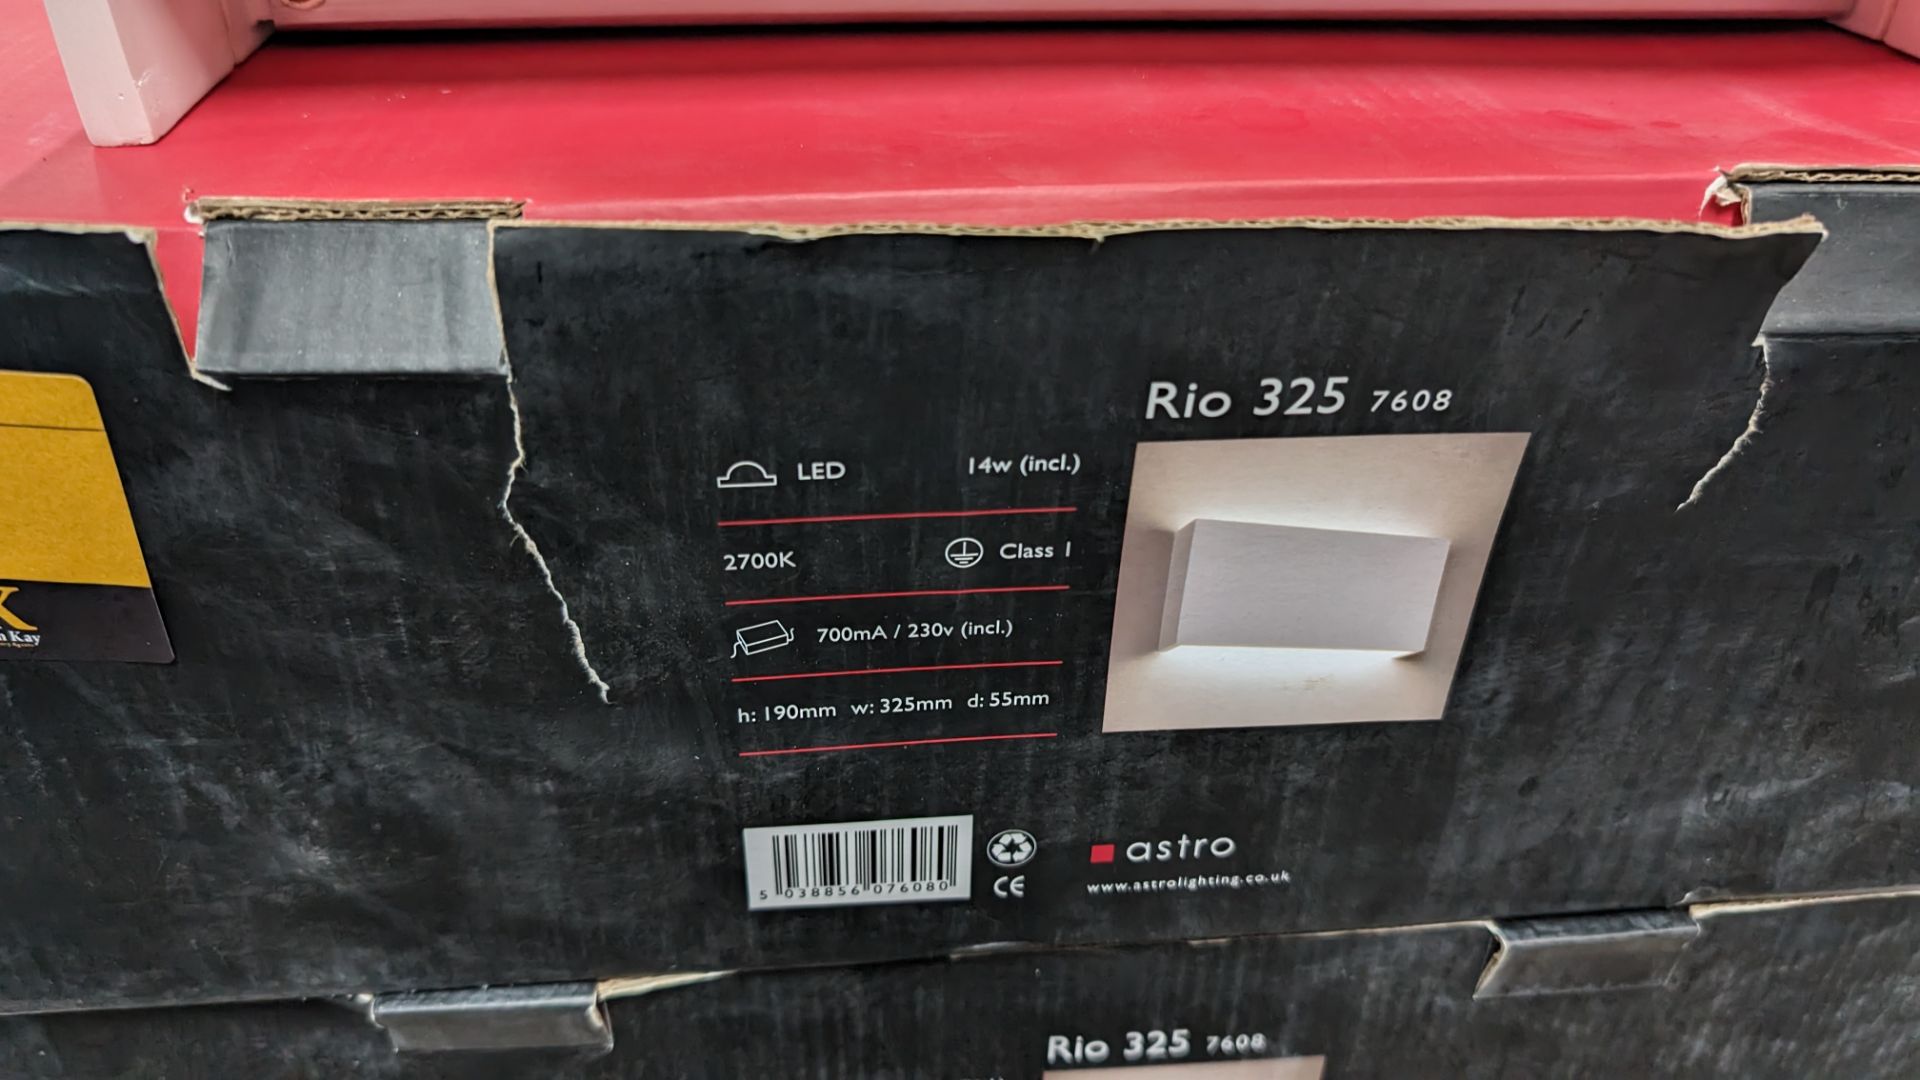 2 off Astro Rio 325 plaster wall lights - complete units - Image 3 of 5